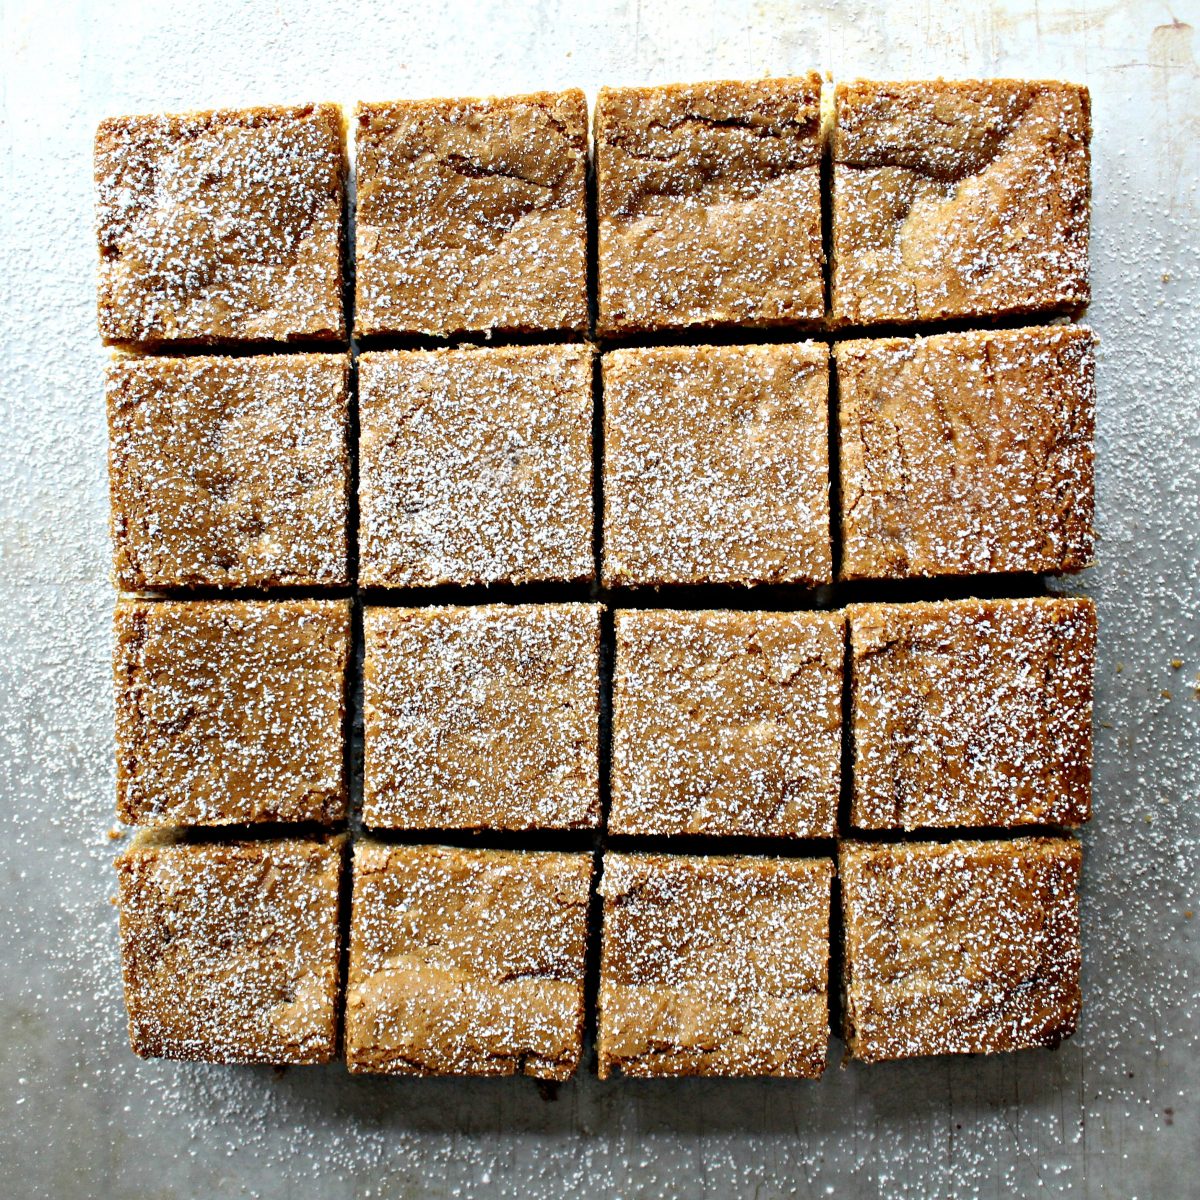 Root beer bars cut into squares and sprinkled with powdered sugar. 